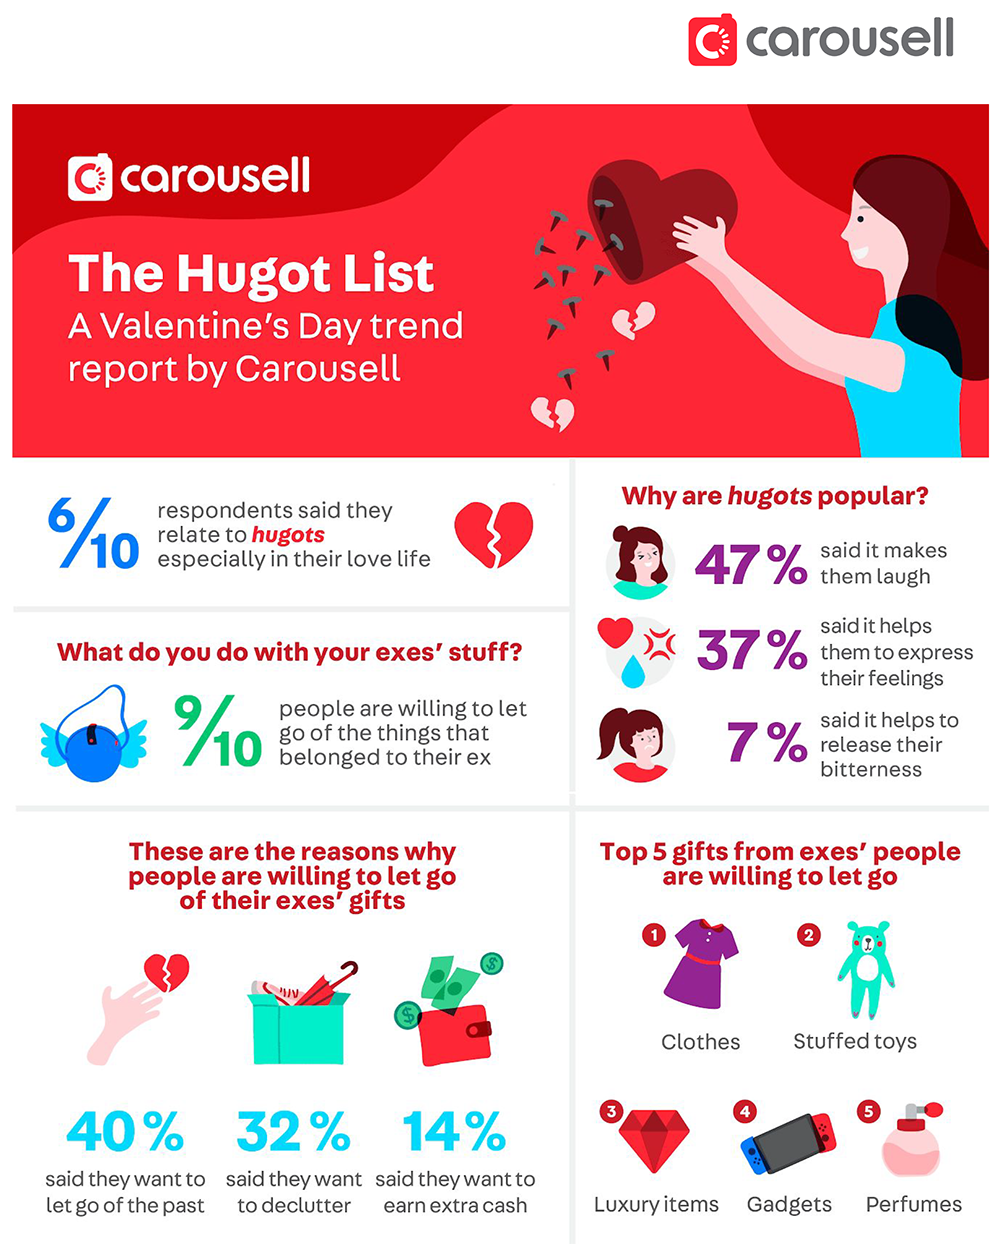 Carousell Frees You From Your Exes Baggage - Carousell Philippines Blog